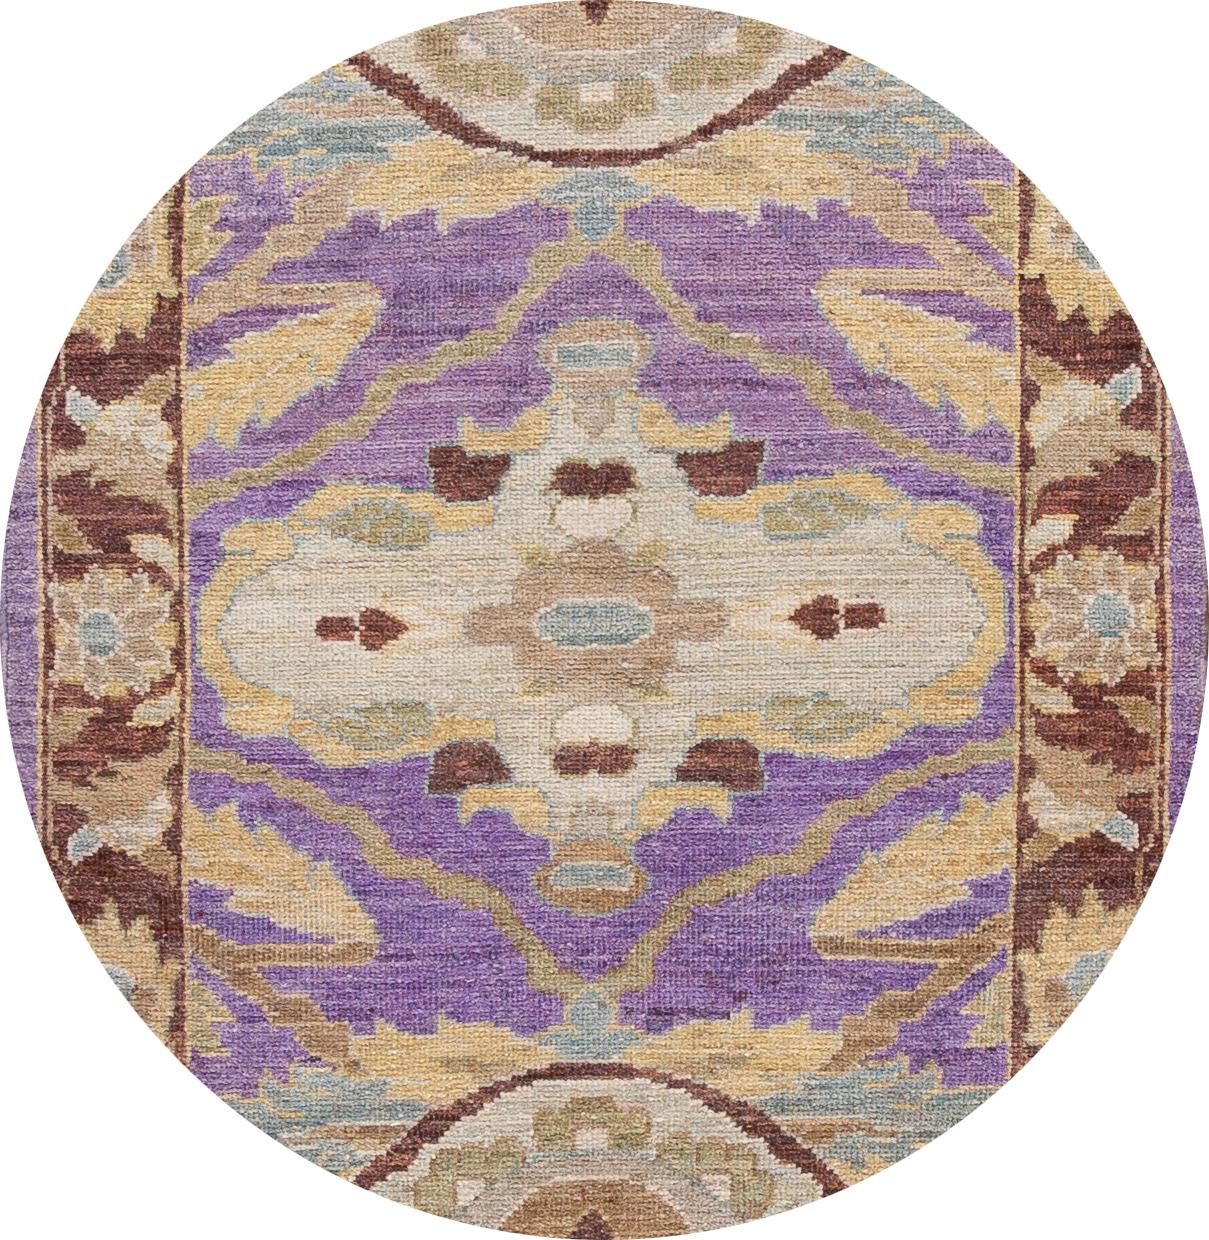 Beautiful Contemporary Sultanabad Runner Rug,hand-knotted wool with a purple field, slim brown frame, tan, and blue accents in an allover design.
This rug measures 3' 5